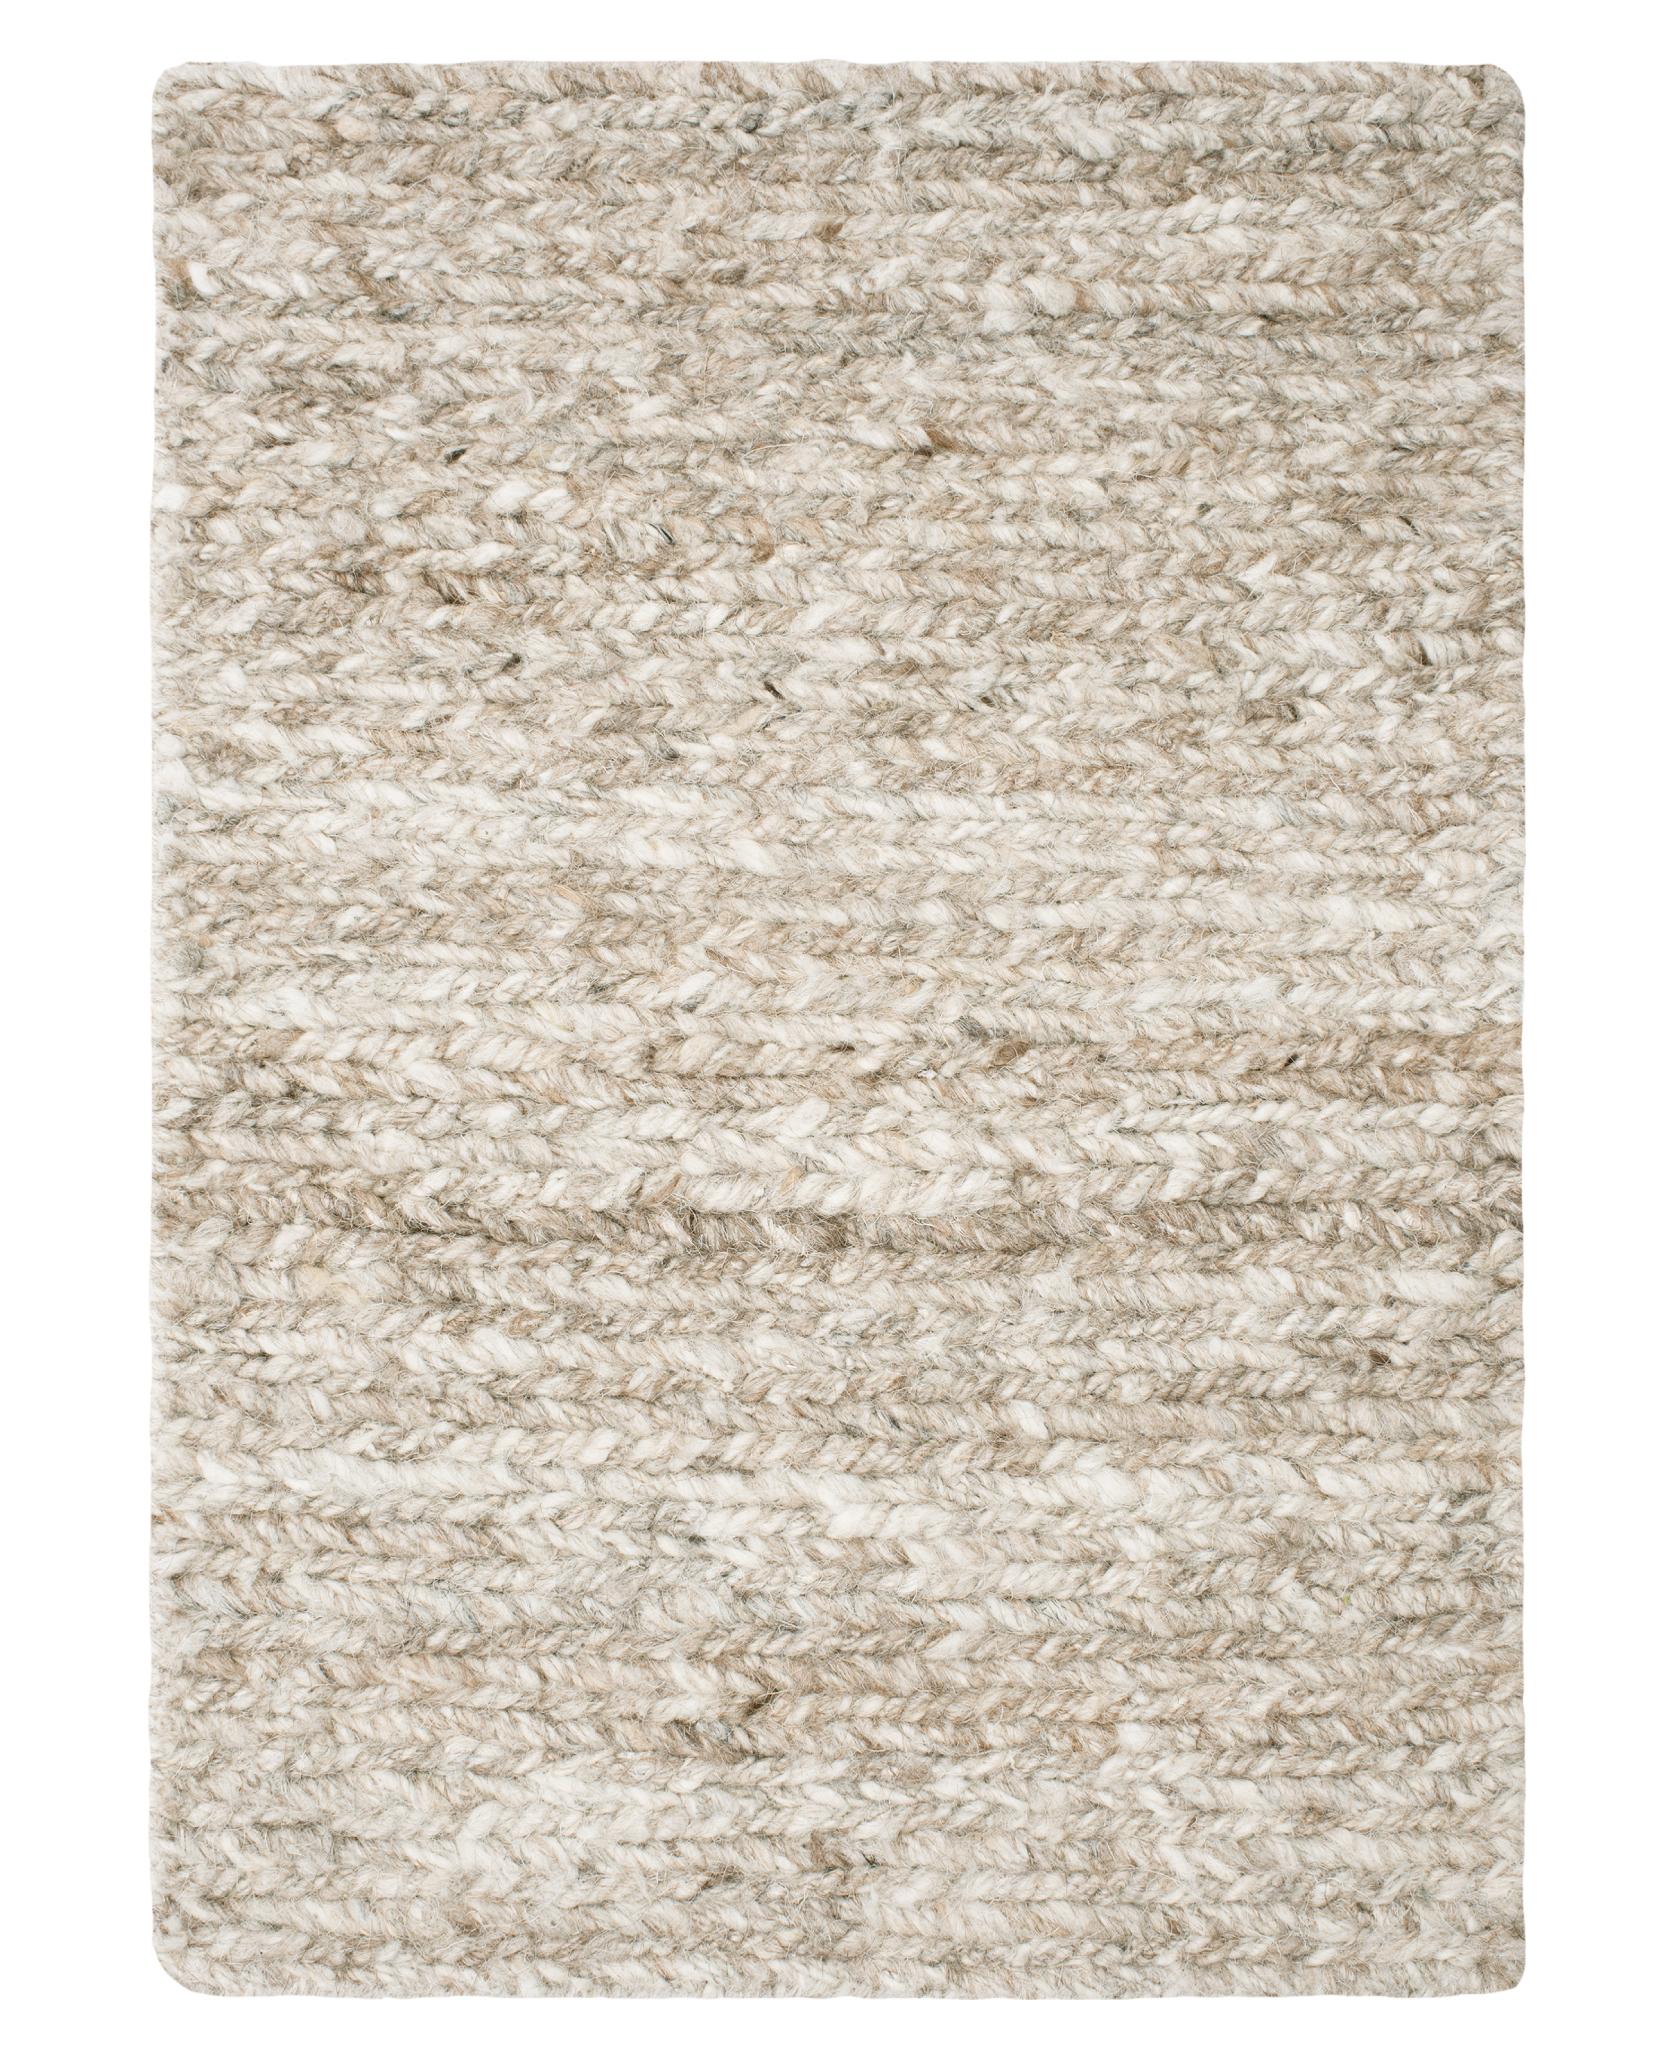 Hand-Woven Chunky Sumac Natural Brown Flatweave Rug by Knots Rugs For Sale